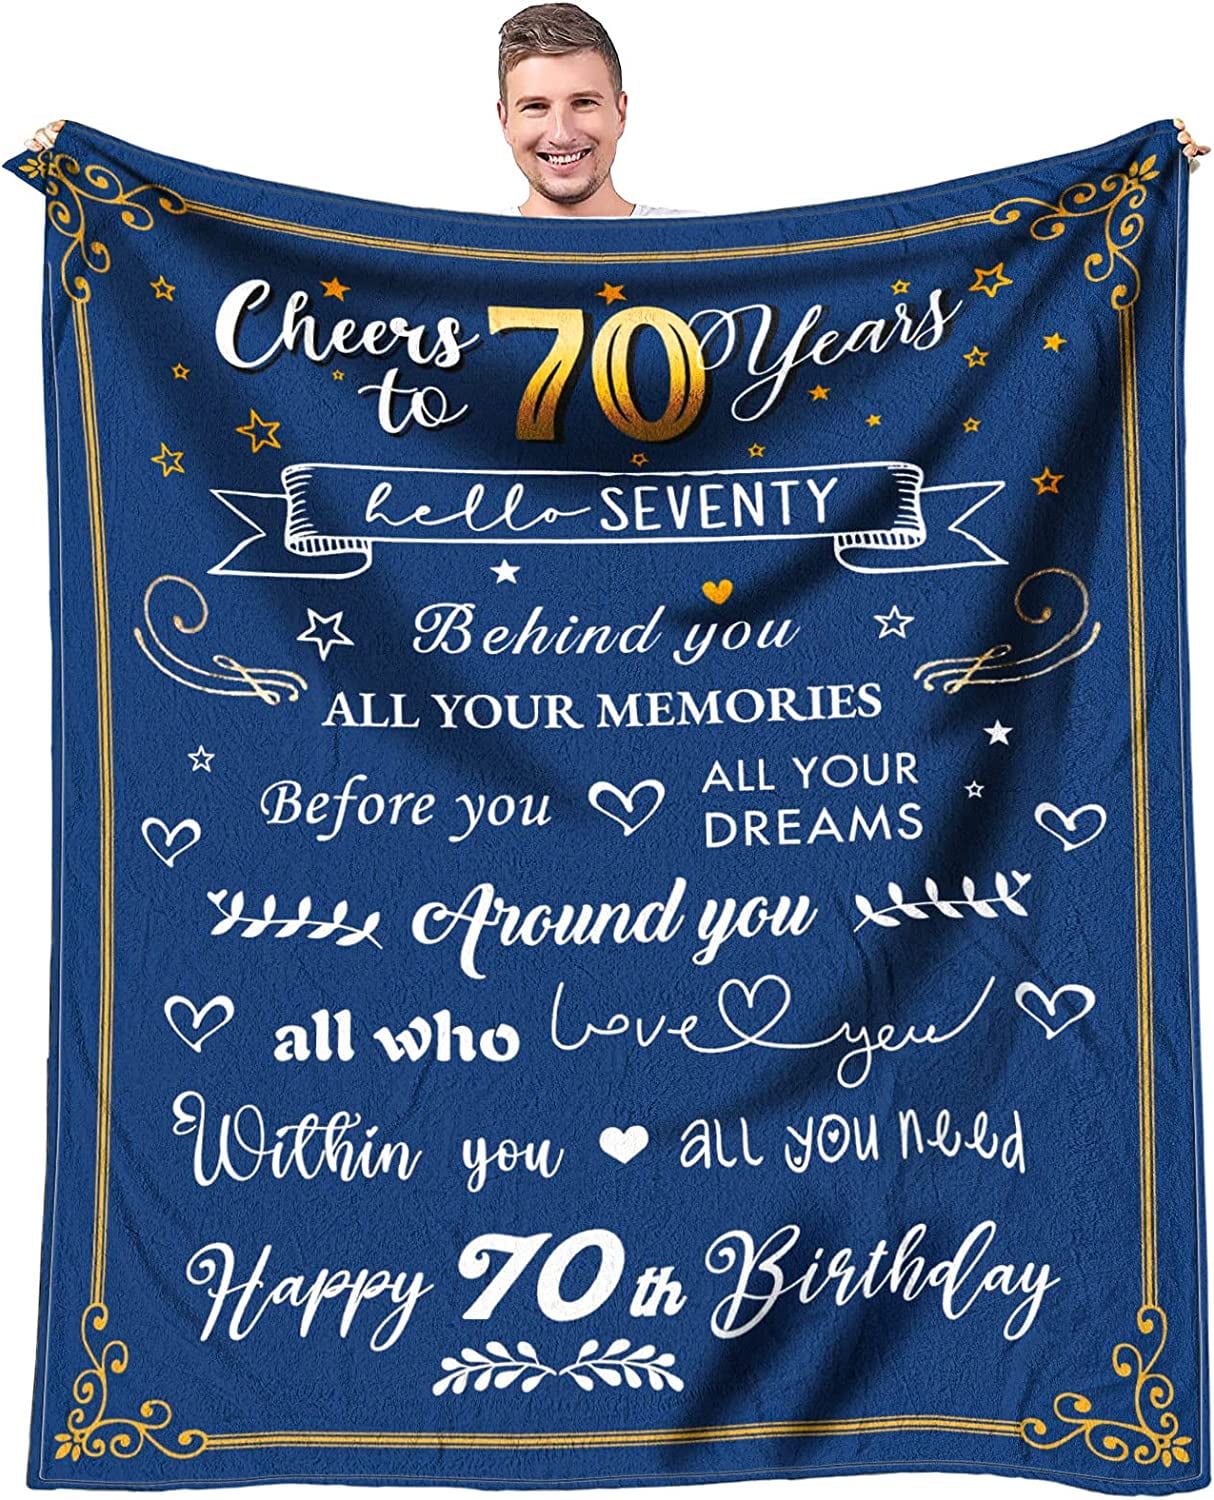 Buy 70th Birthday Gifts for Men, 70 Year Old Gifts for Men 1953 70th  Birthday Decorations for Men Women Fathers Mothers Anniversary Christmas  Gifts Ideas for Dad Mom Grandpa and Grandma -